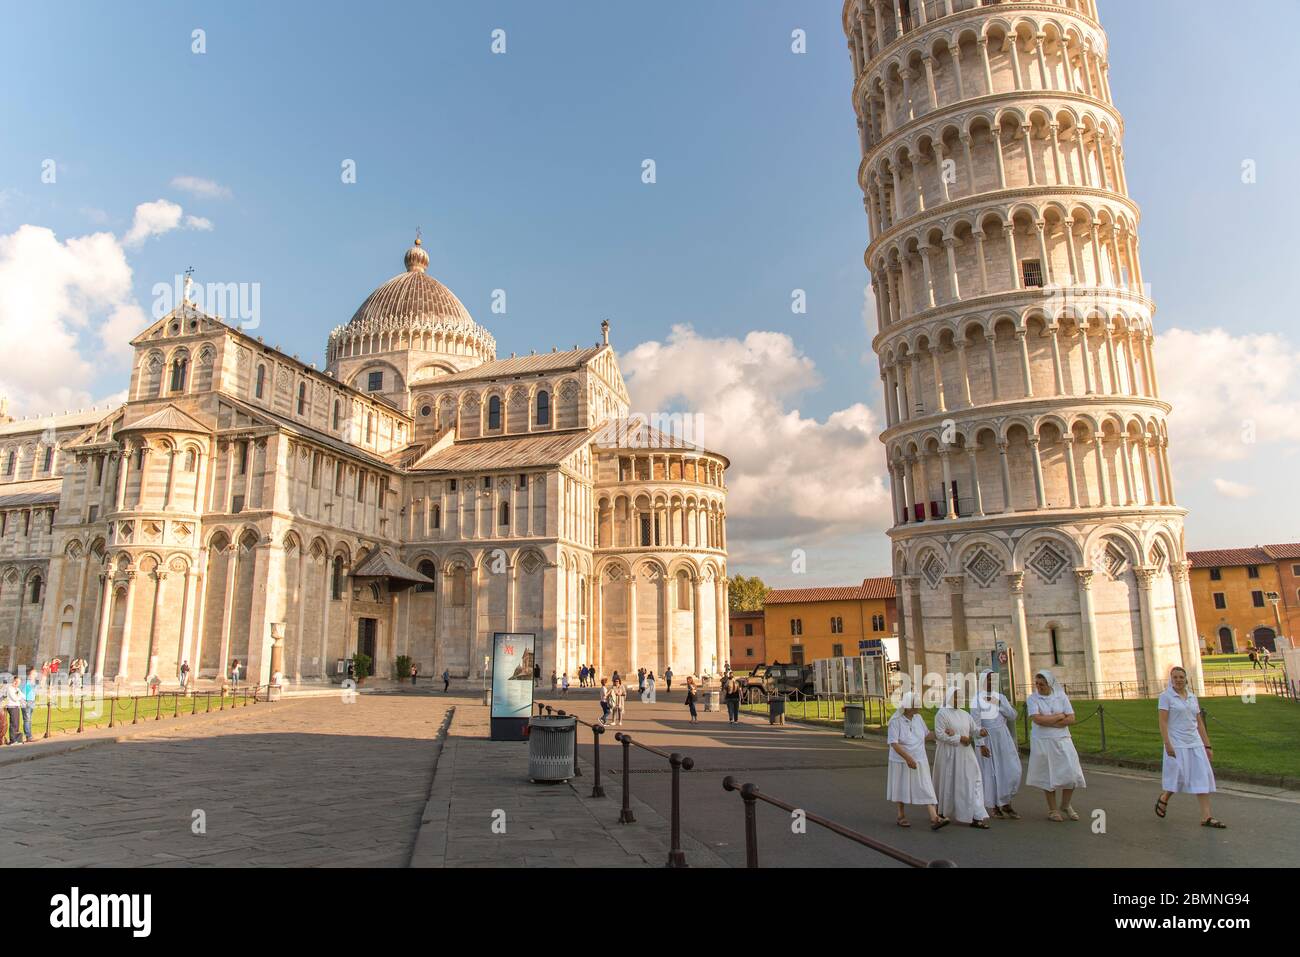 Nuns at the Leaning Tower of Pisa, Piazza dei Miracoli, the Field of Miracles, Pisa, Tuscany, Italy Stock Photo